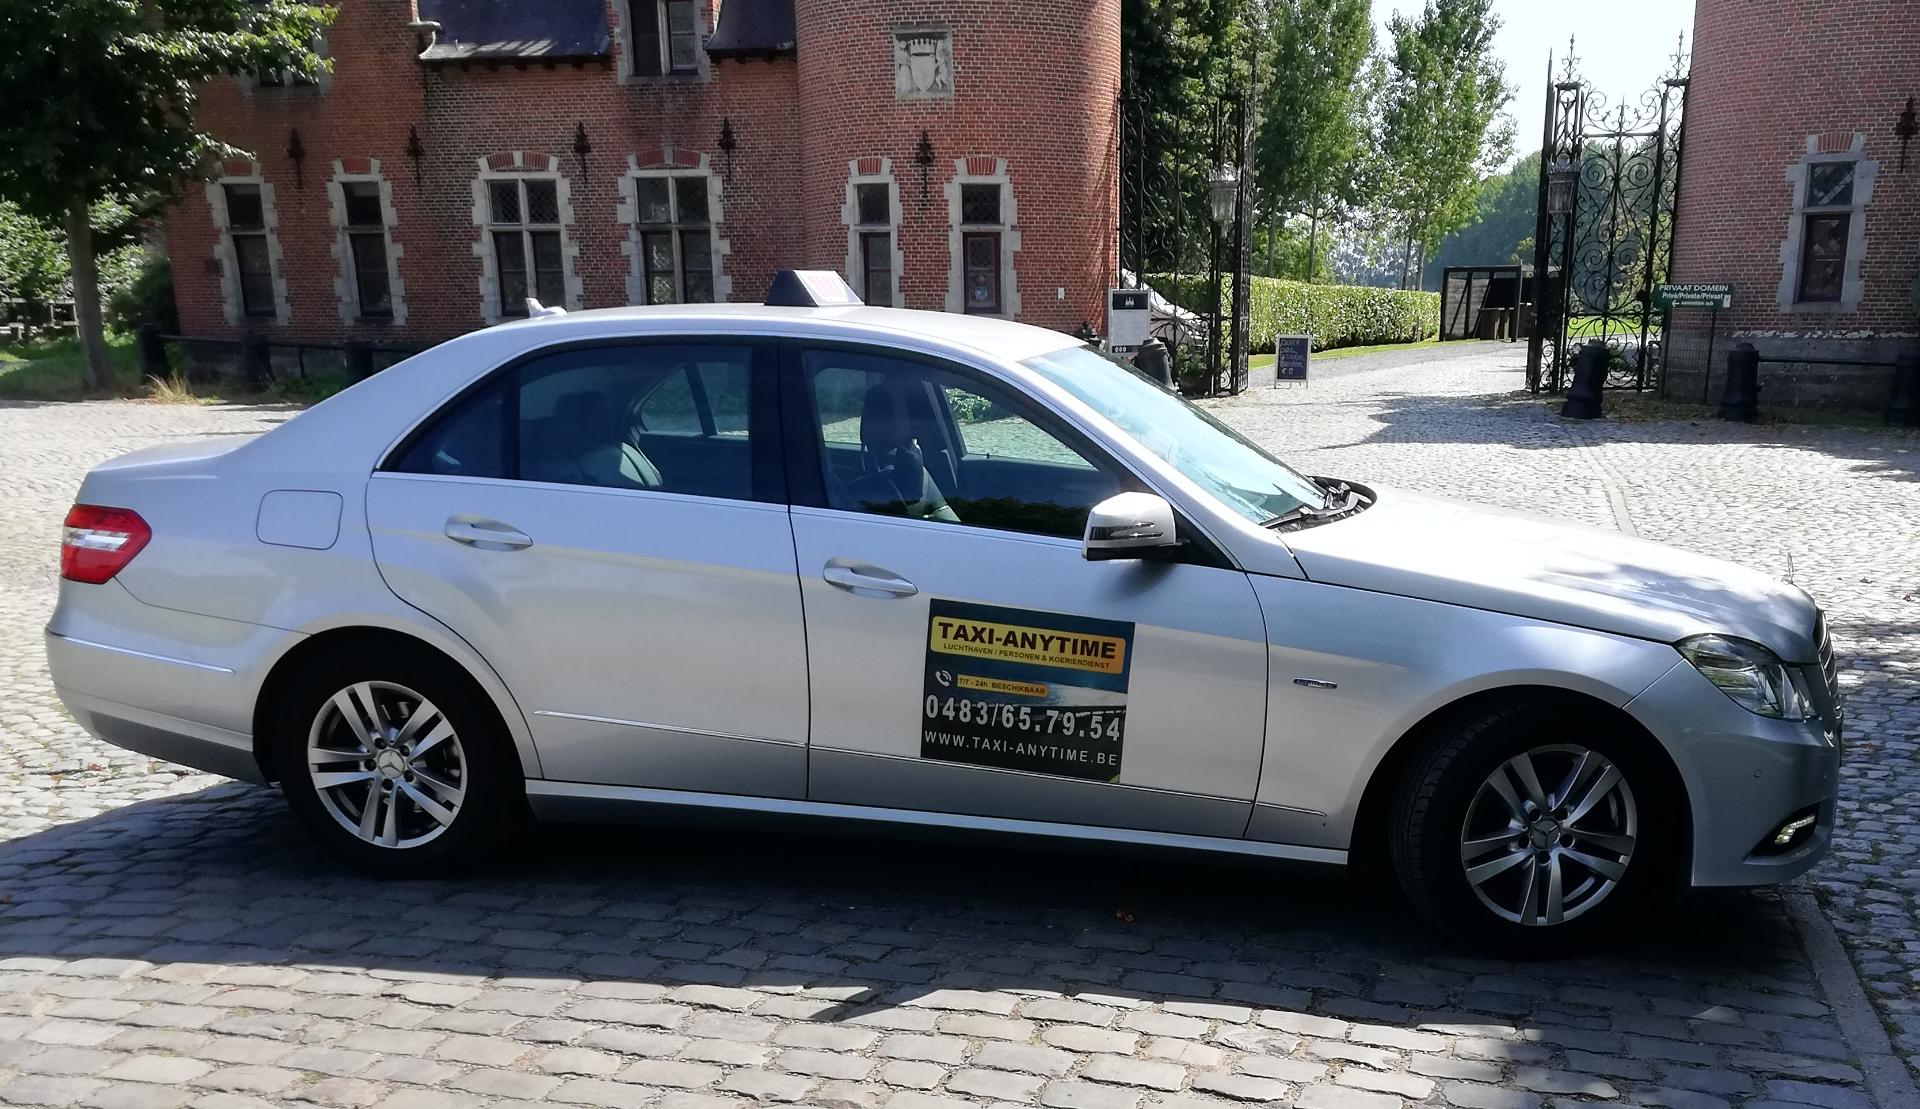 koeriers Oostende | Taxi Anytime